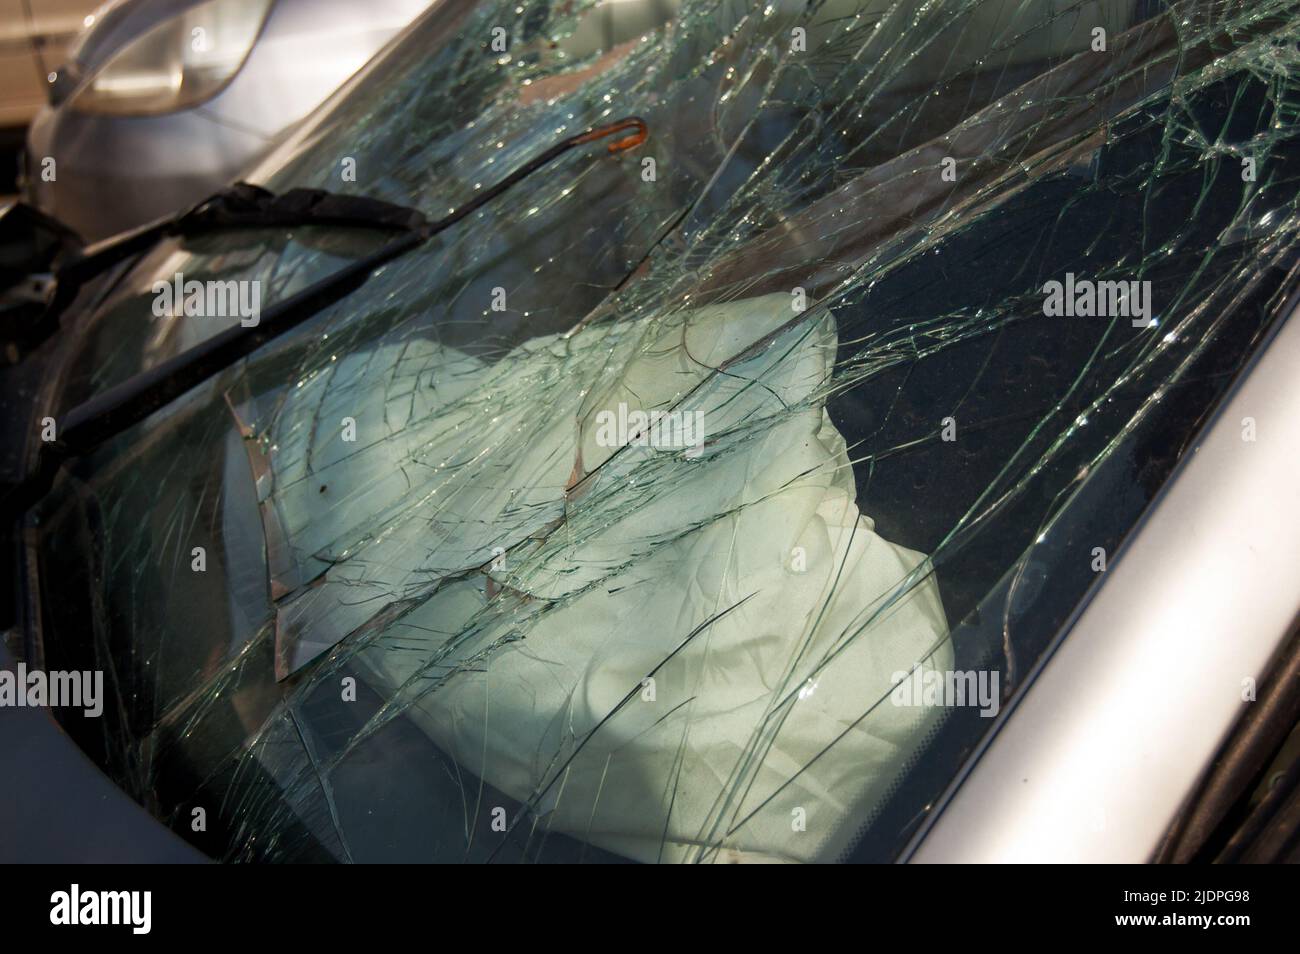 cracked glass of windshield of the car involved in an accident. Stock Photo